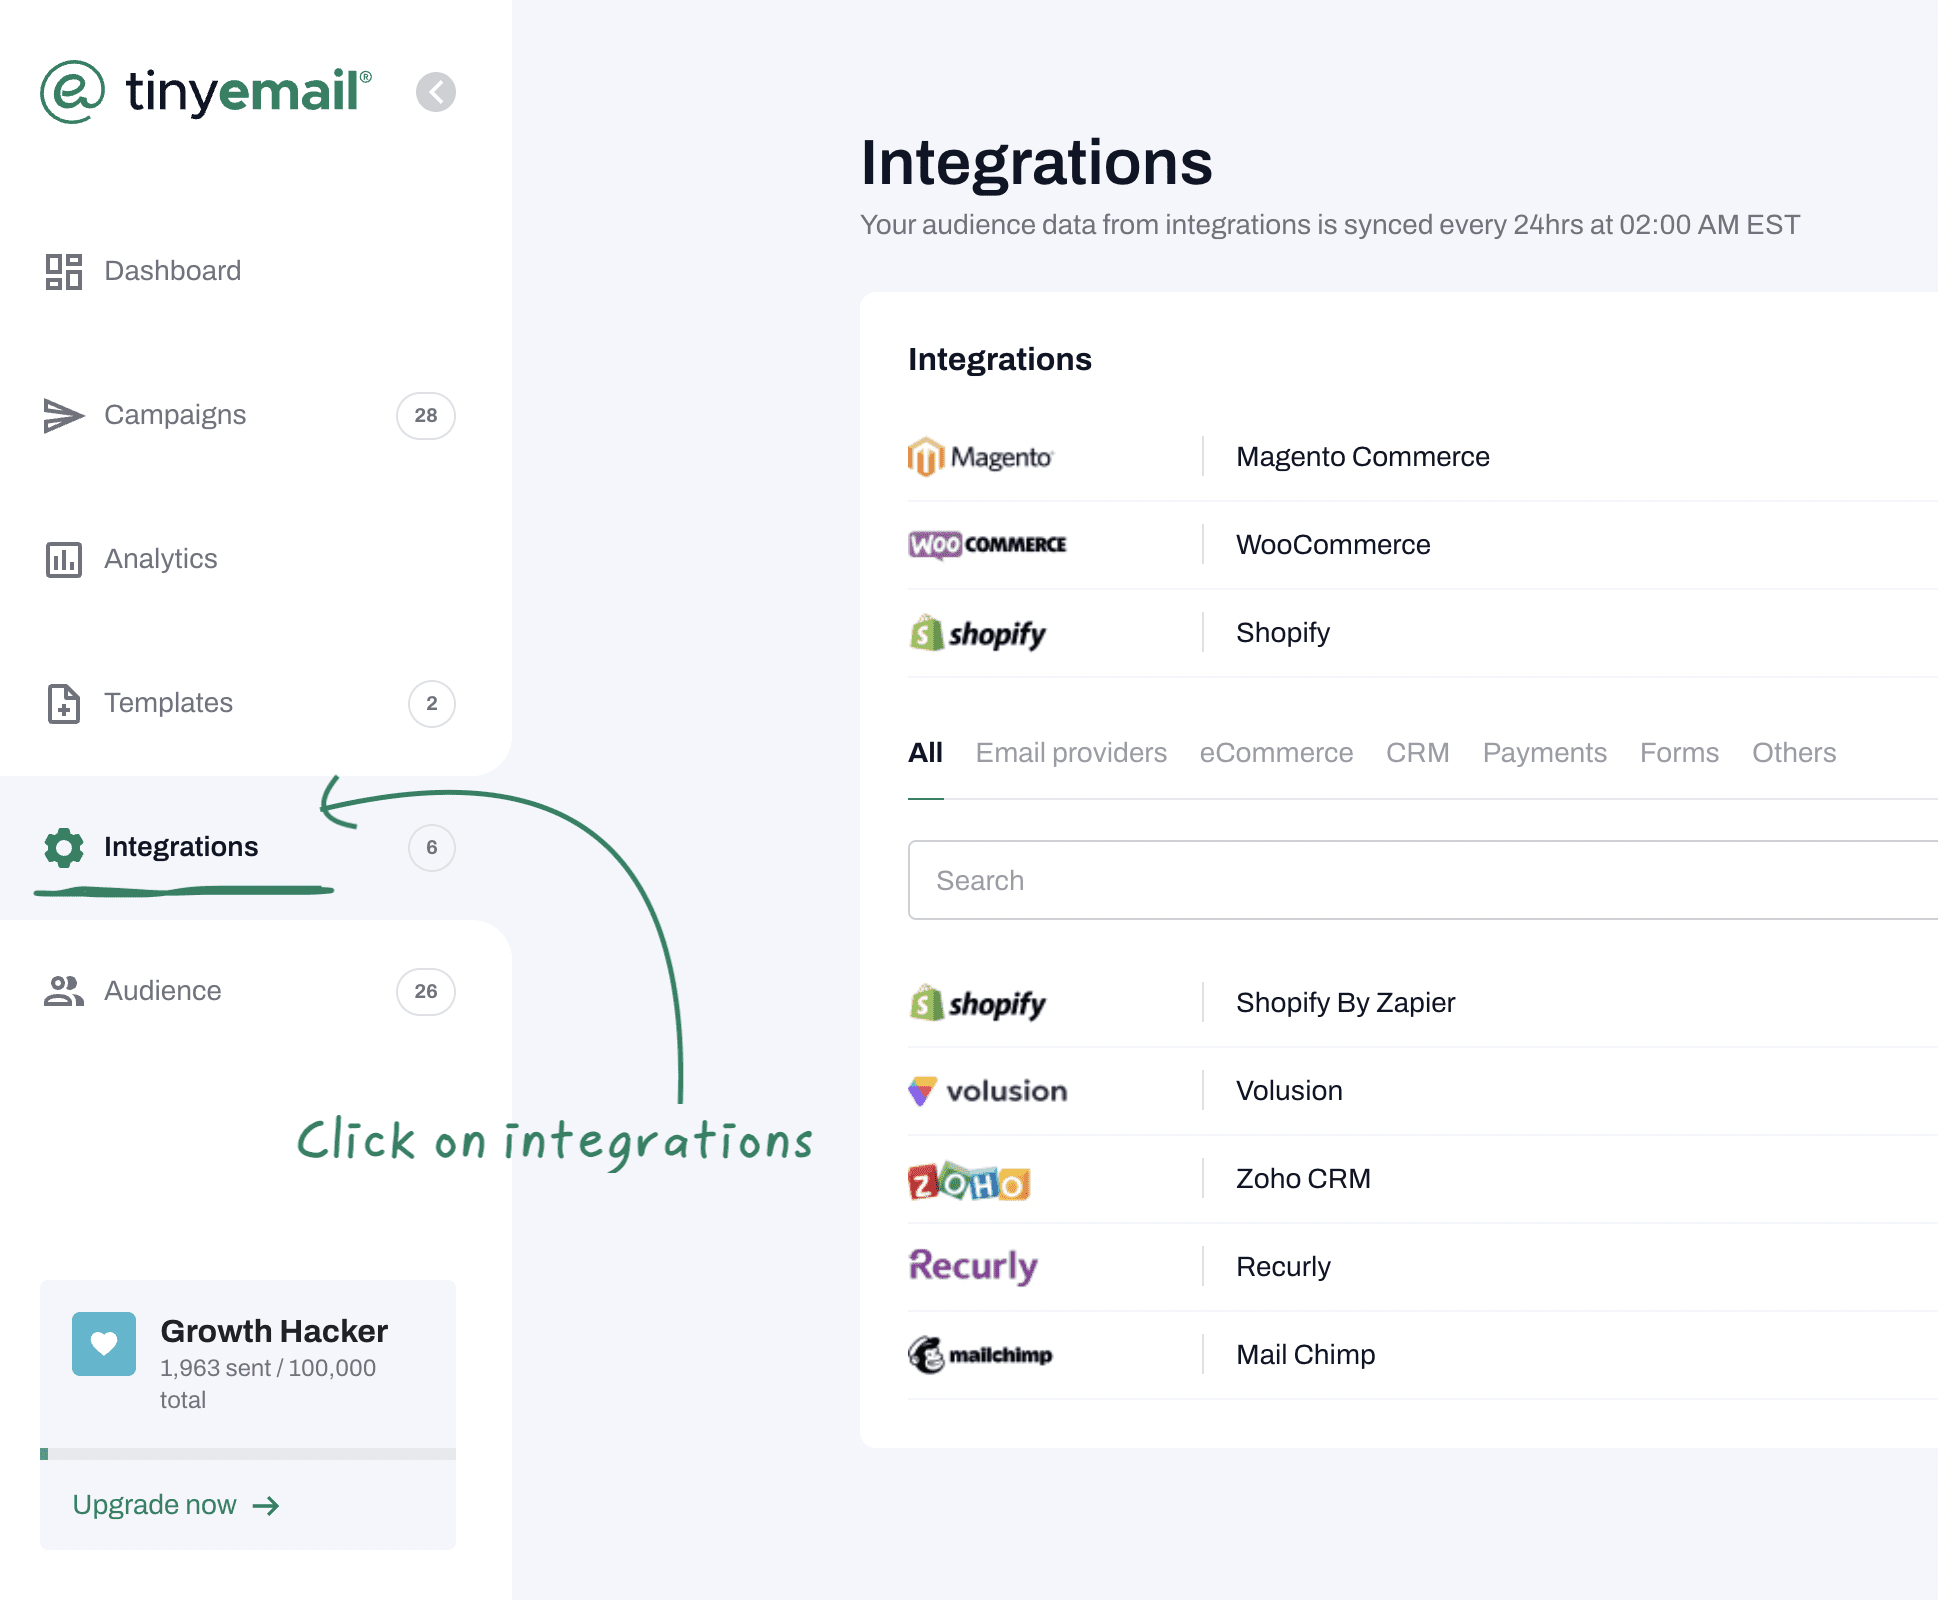 tinyemail Integrations